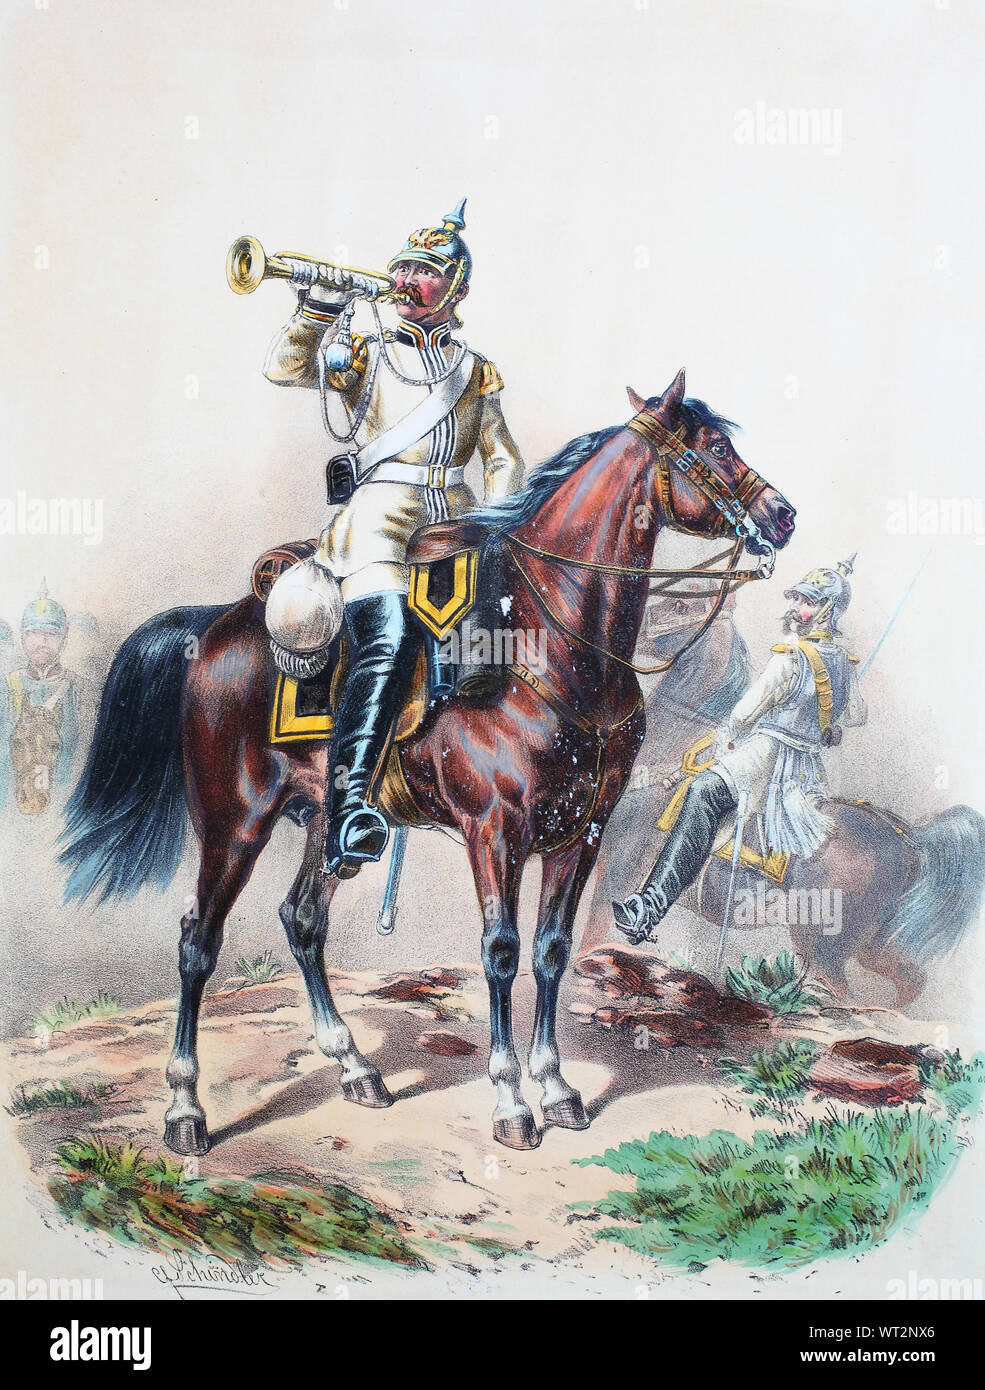 Royal Prussian Army, Guards Corps, Preußens Heer, preussische Garde, Leib Kürassier Regiment, Schlesisches No.1, Trompeter, Offizier, Digital improved reproduction of an illustration from the 19th century Stock Photo